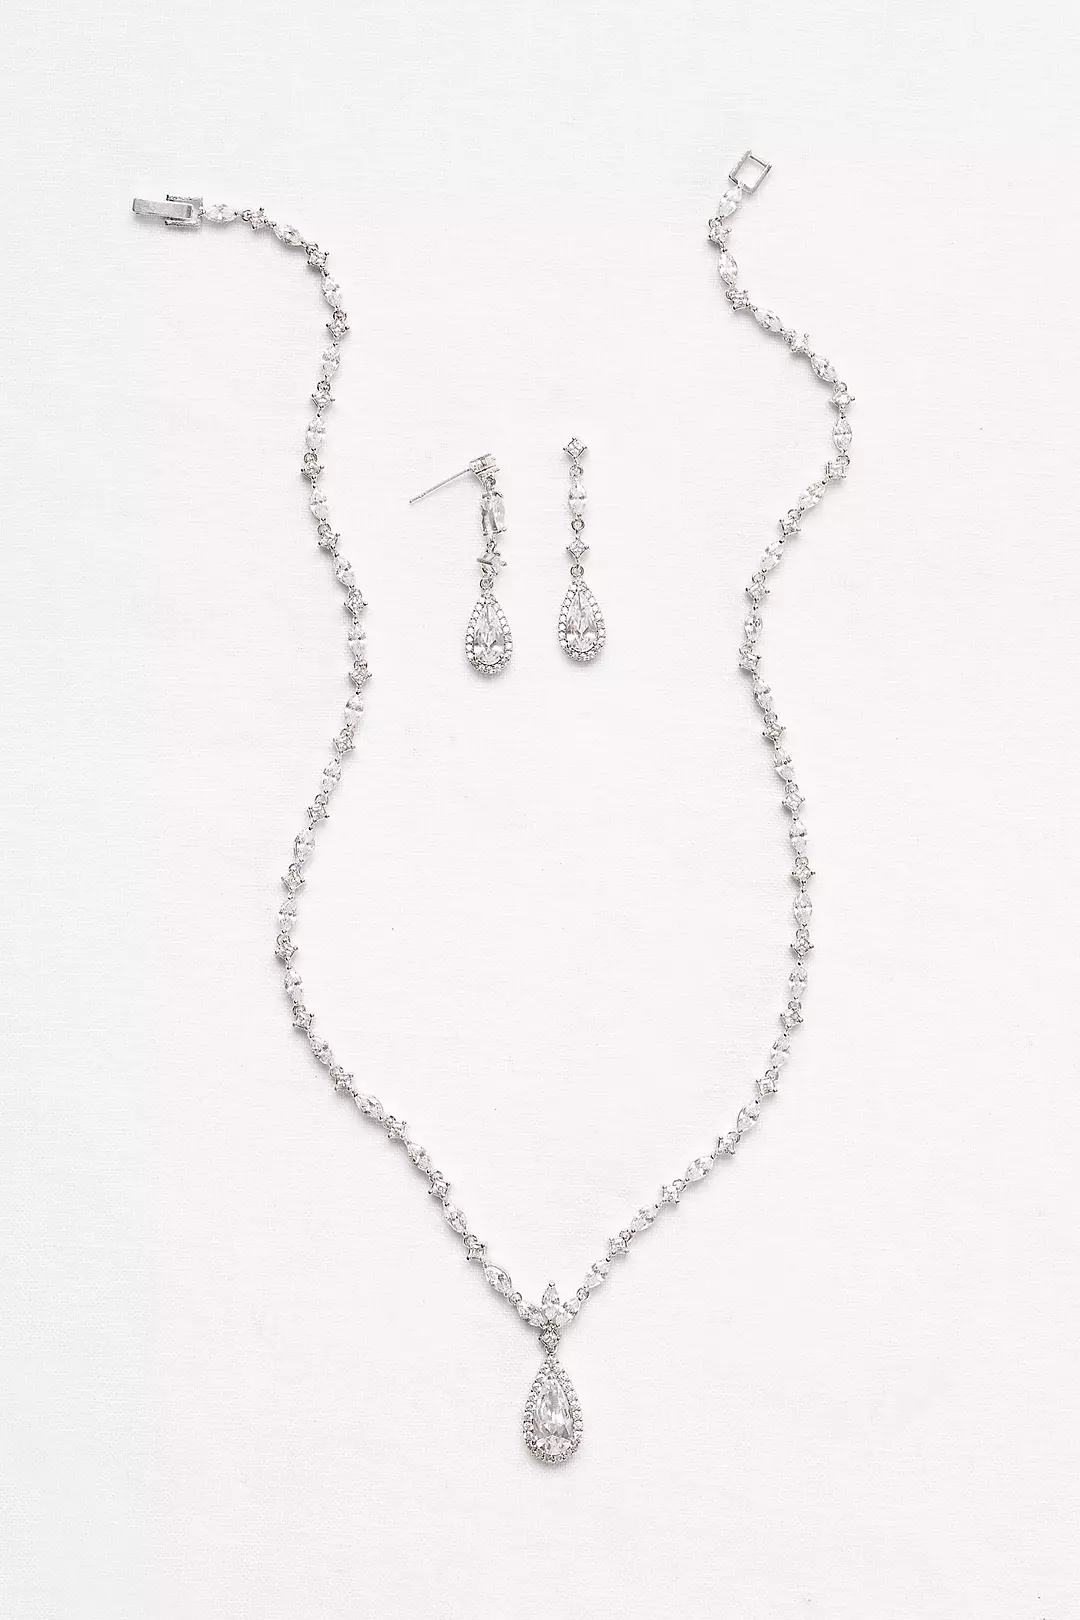 Dainty Cubic Zirconia Necklace and Earring Set  Image